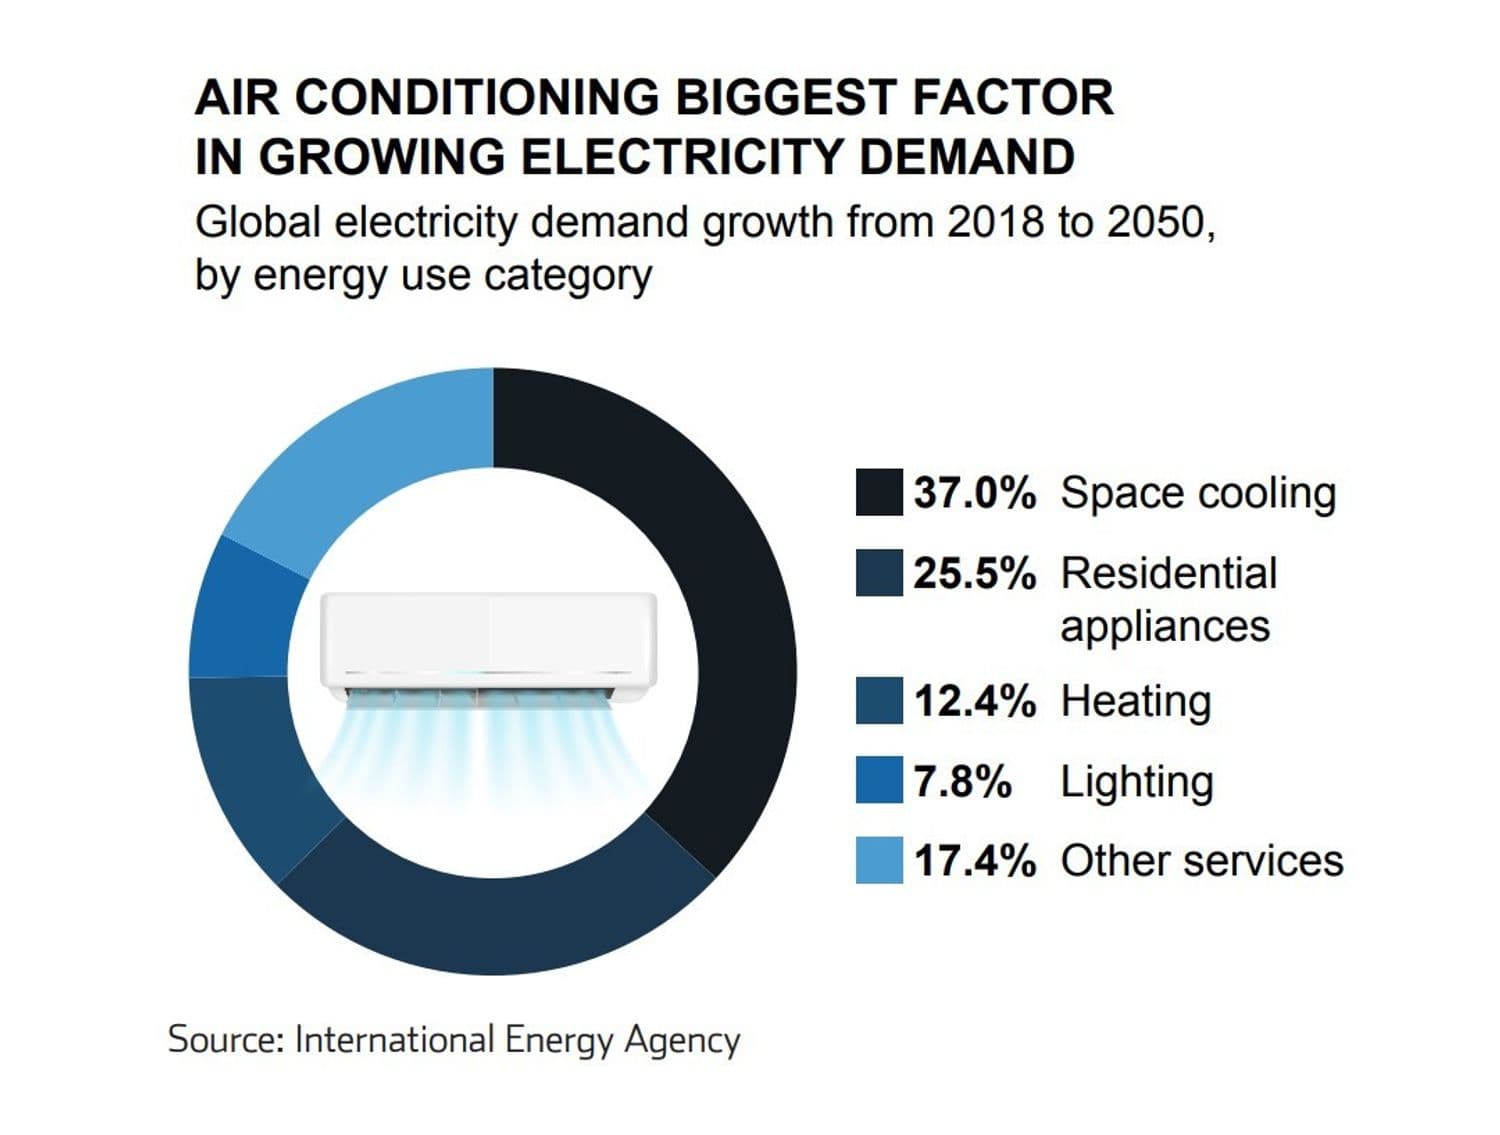 Air Conditioning Is the Biggest Factor in Growing Electricity Demand